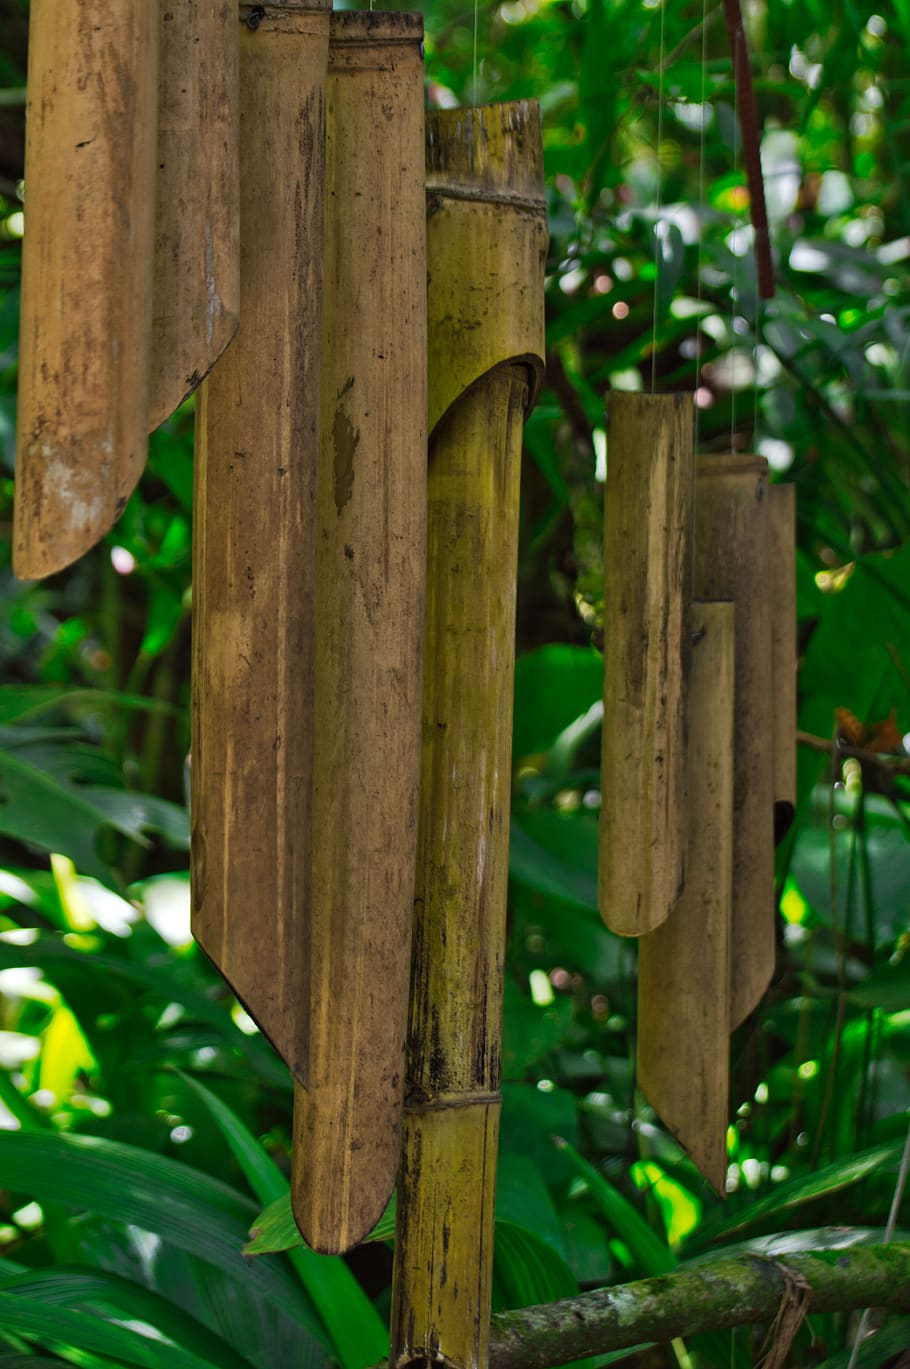 cartago, costa rica, wind chimes, bamboo, wood - material, focus on foreground, plant, close-up, day, tree